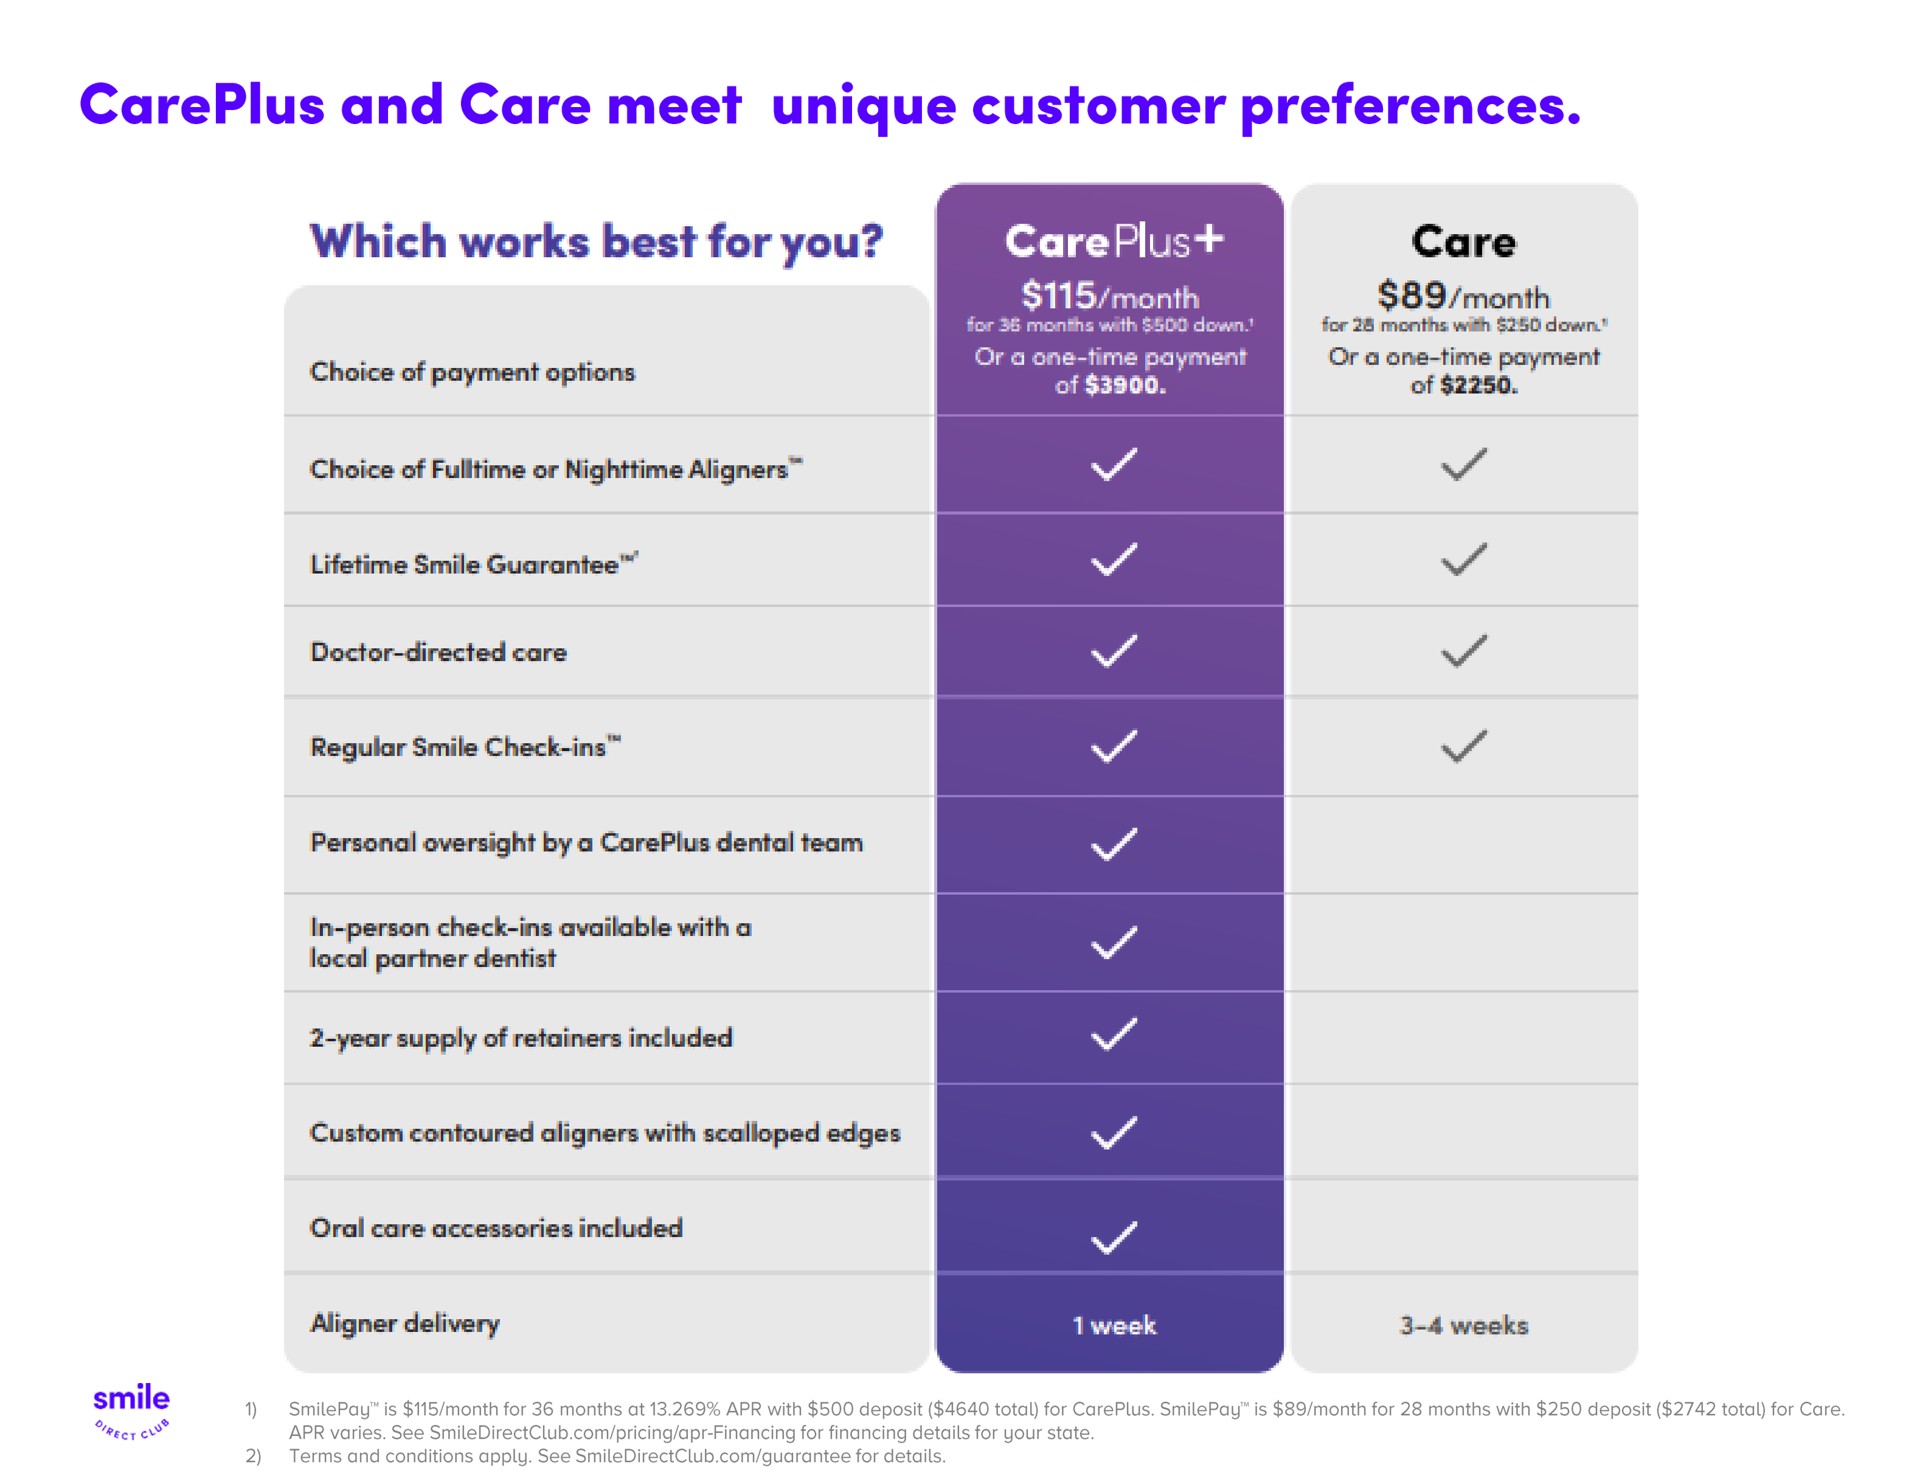 and care meet unique customer preferences | SmileDirectClub